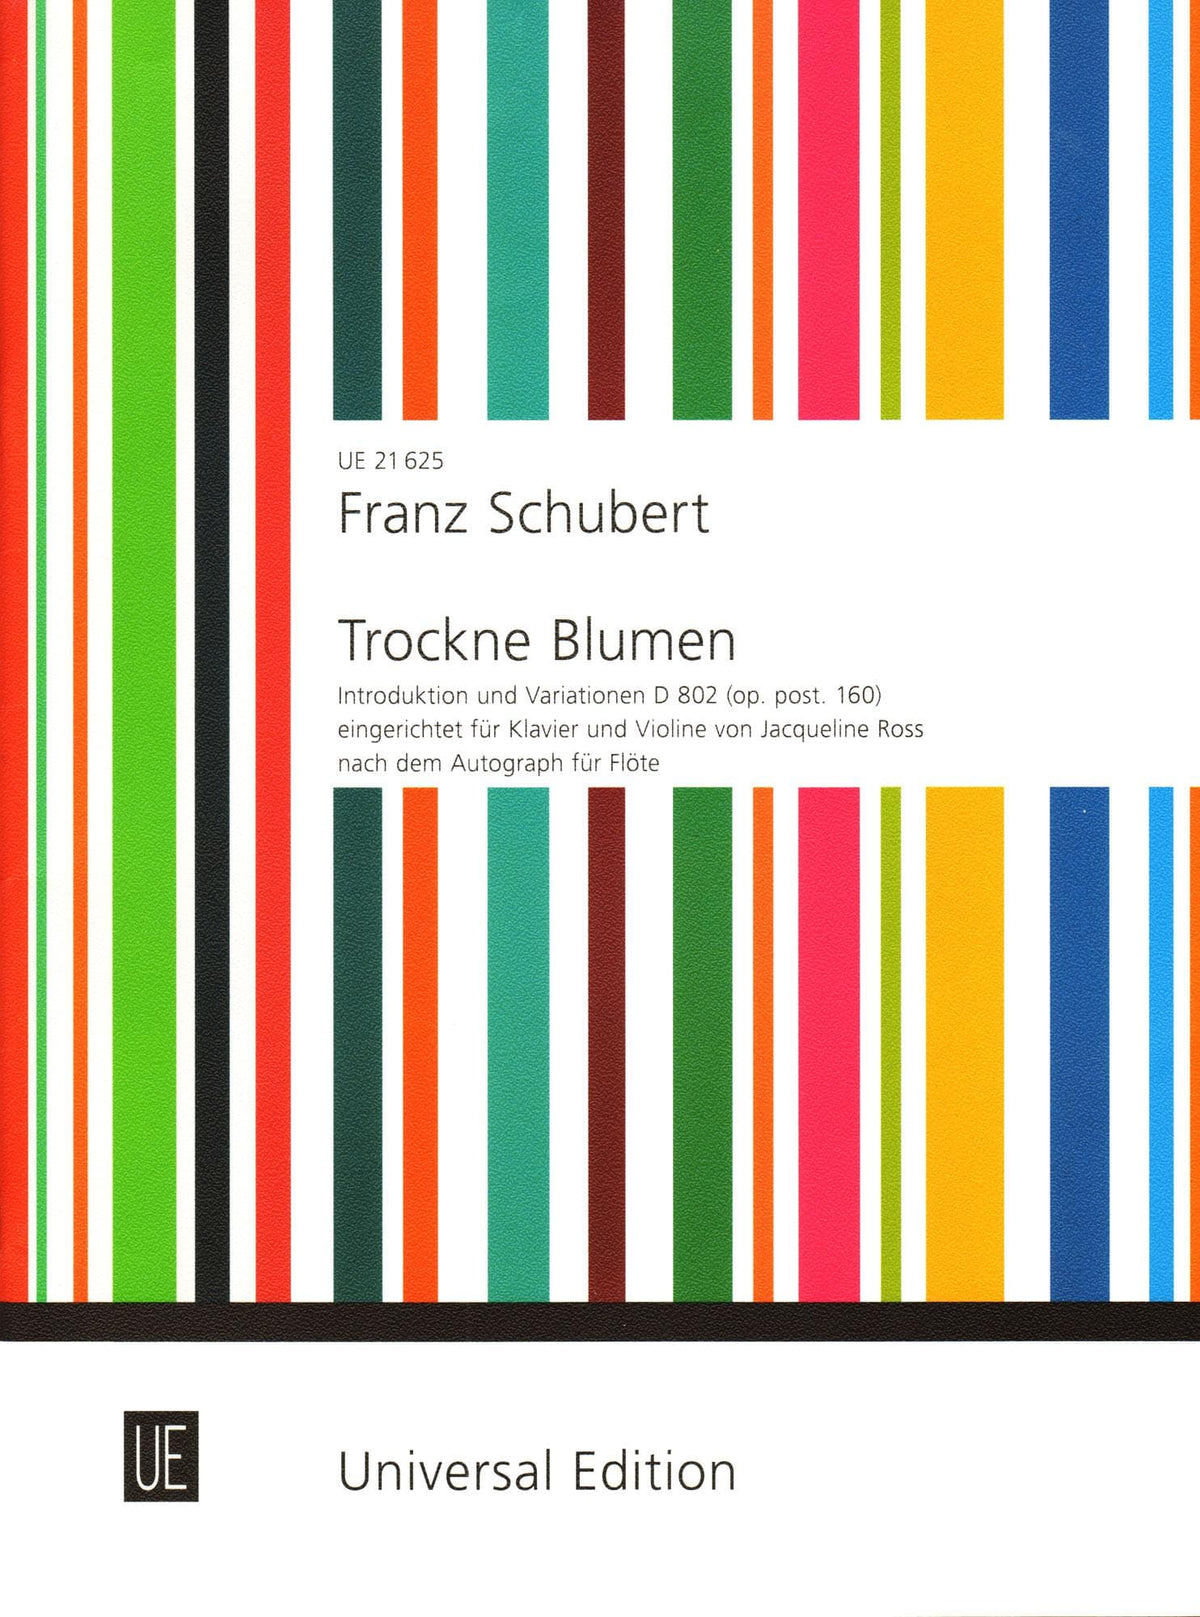 Schubert, Franz - Trockne Blumen, D 802 - Theme and Variations - for Violin and Piano - Universal Edition